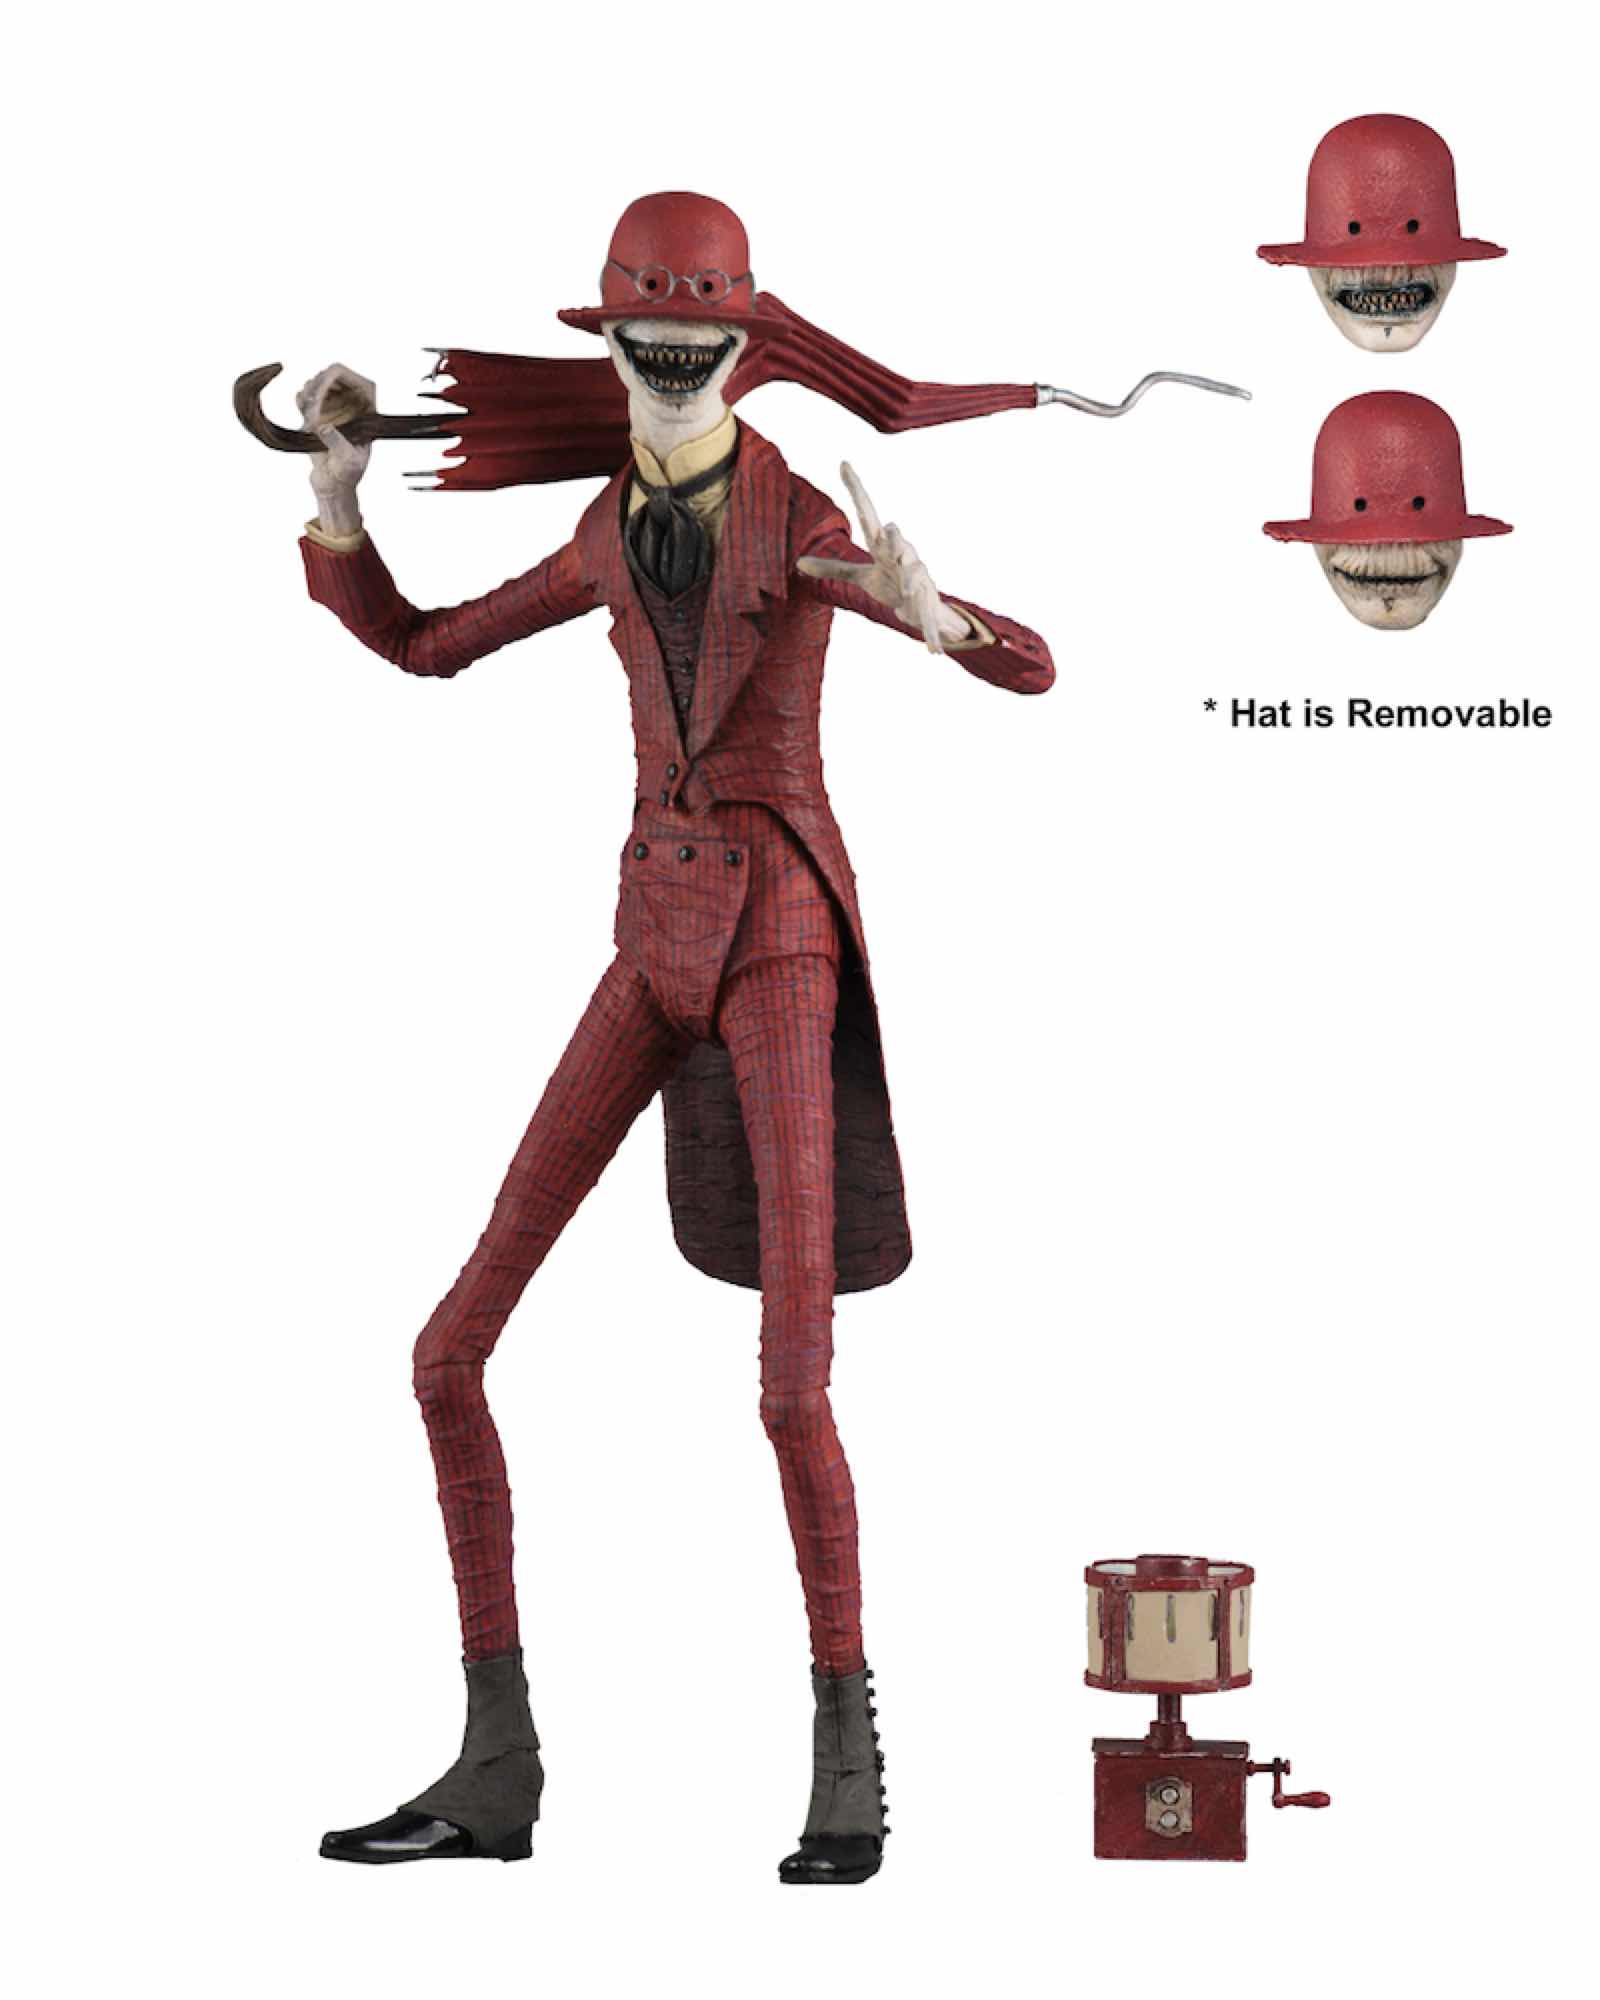 ULTIMATE CROOKED MAN FIGURA 23 CM SCALE ACTION FIGURE THE CONJURING UNIVERSE